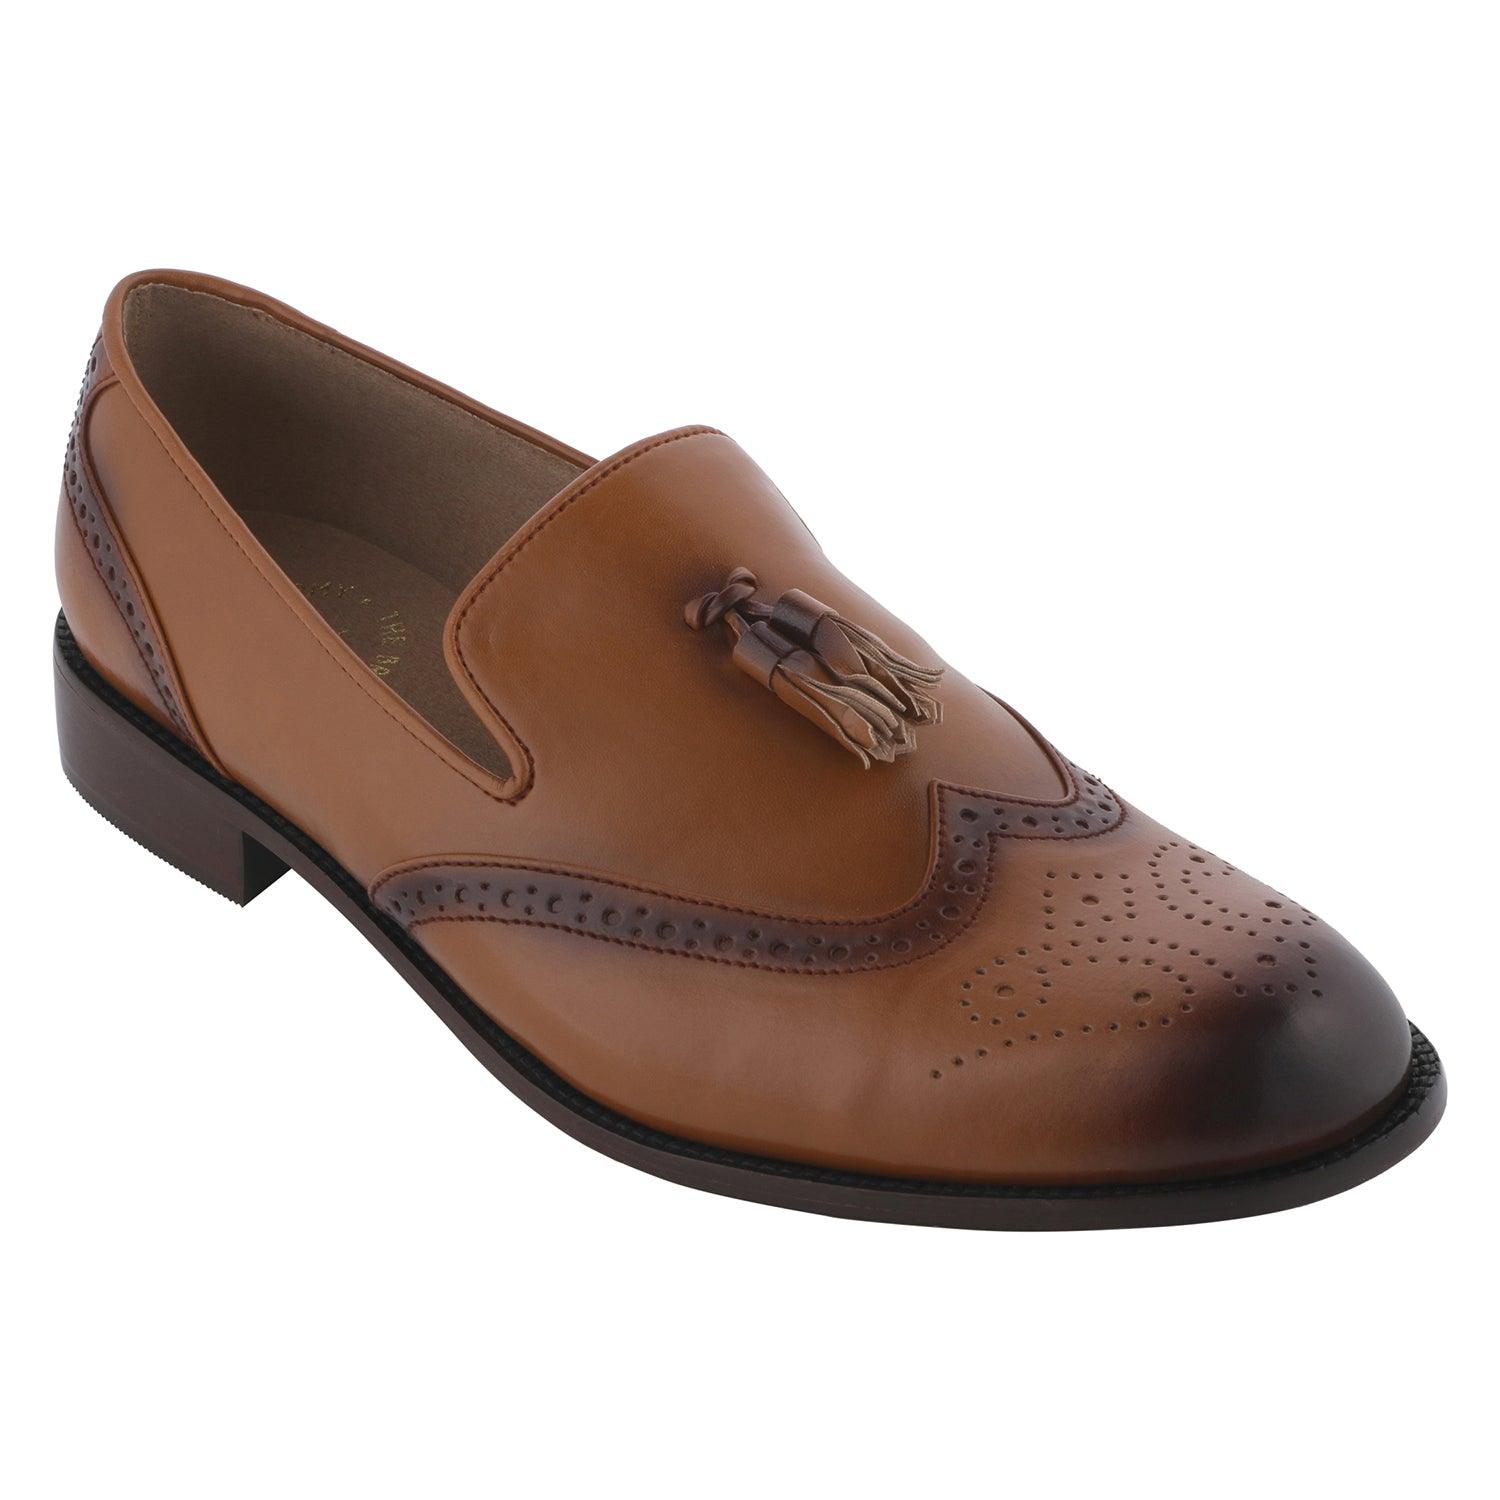 STEAFANO TAN WINGTIP BROGUES LOAFERS